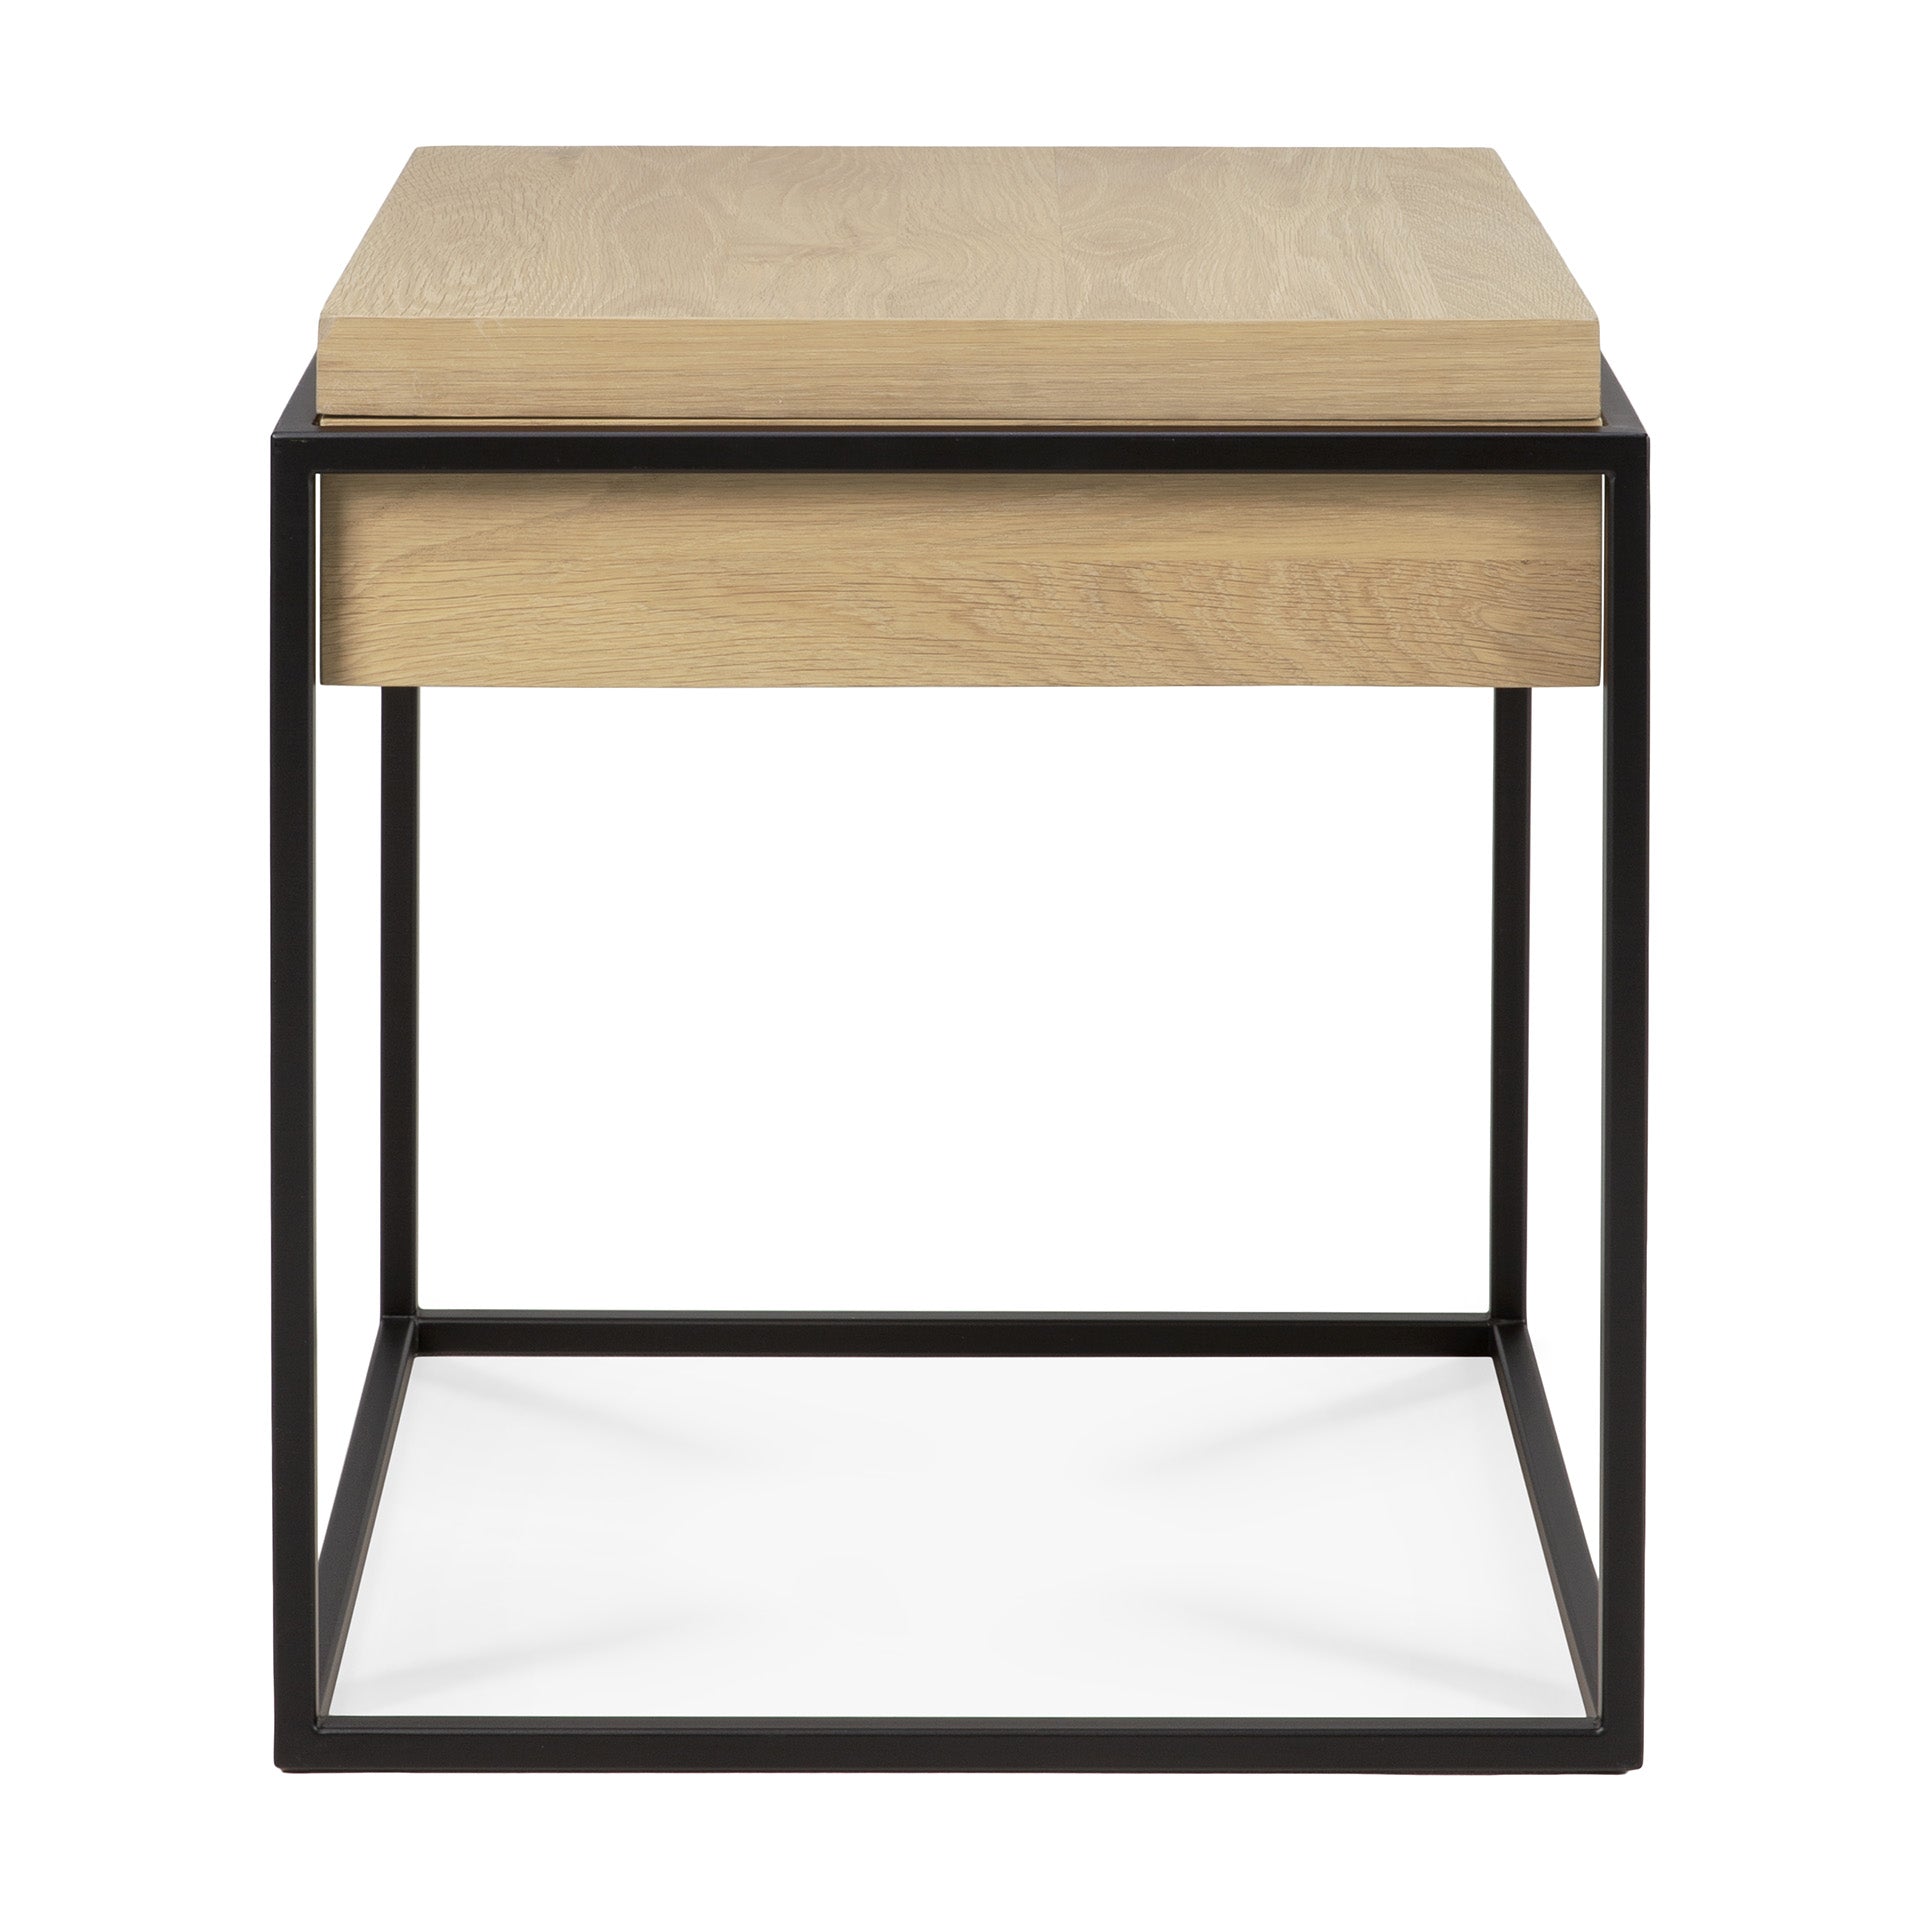 Ethnicraft Oak Monolit Side Table available from Make Your House A Home, Bendigo, Victoria, Australia